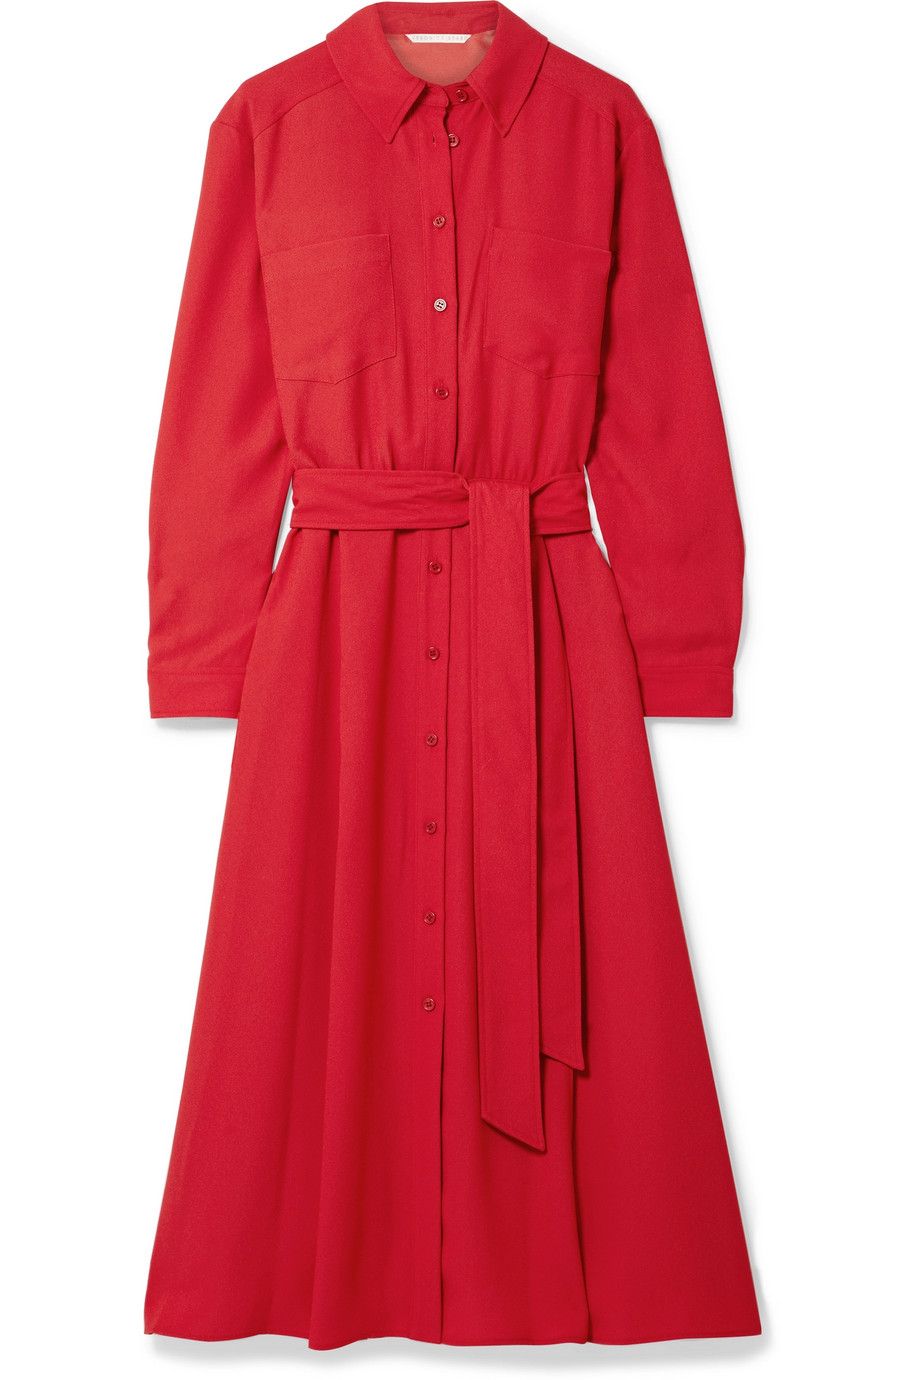 Cary belted crepe midi dress